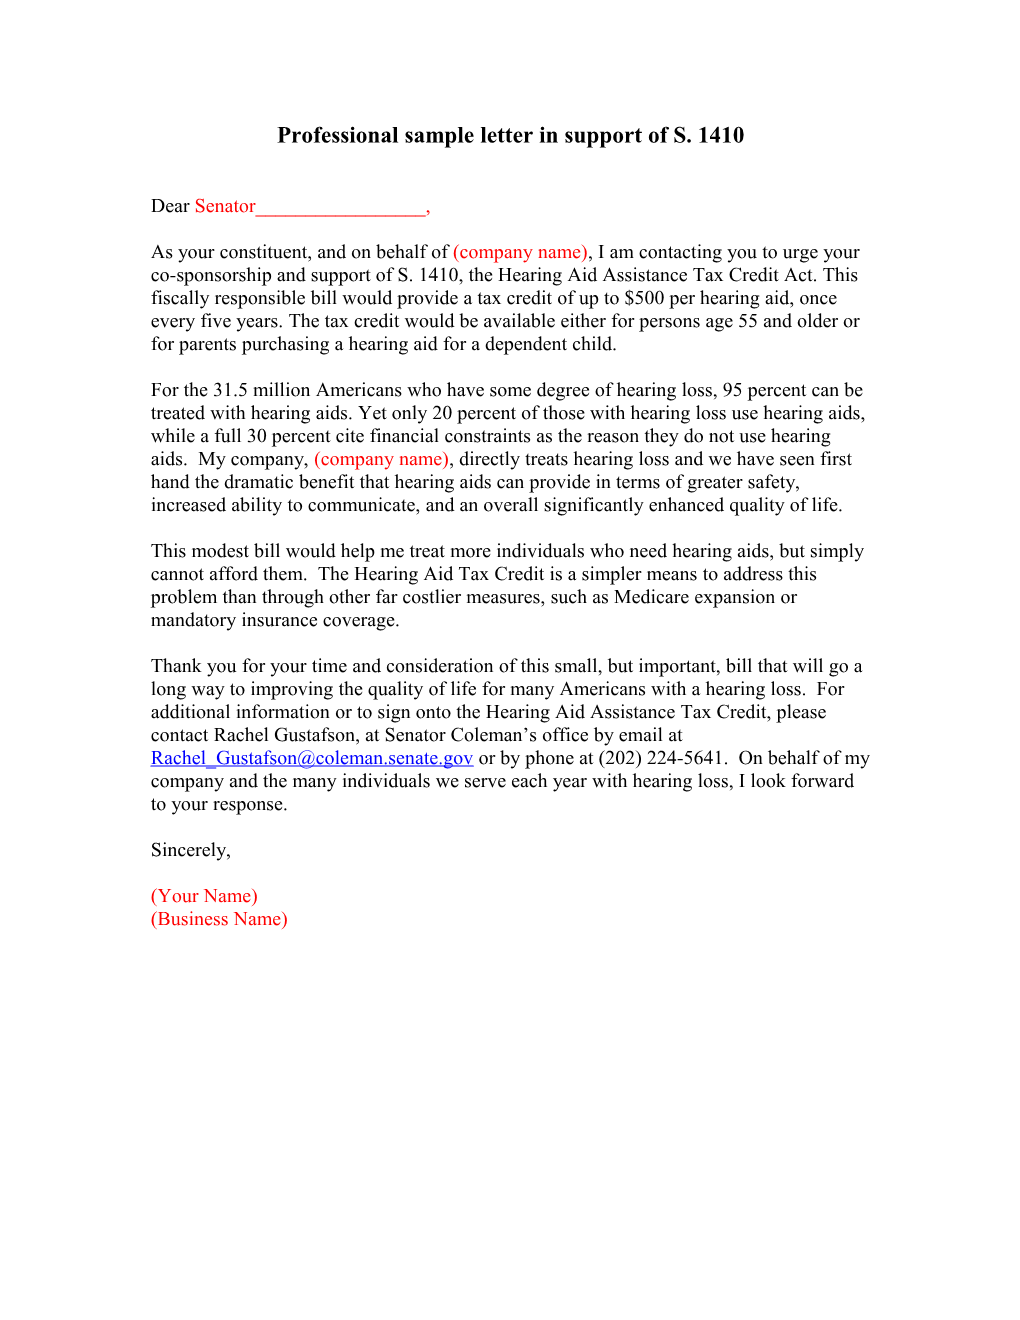 Professional Sample Letter in Support of H